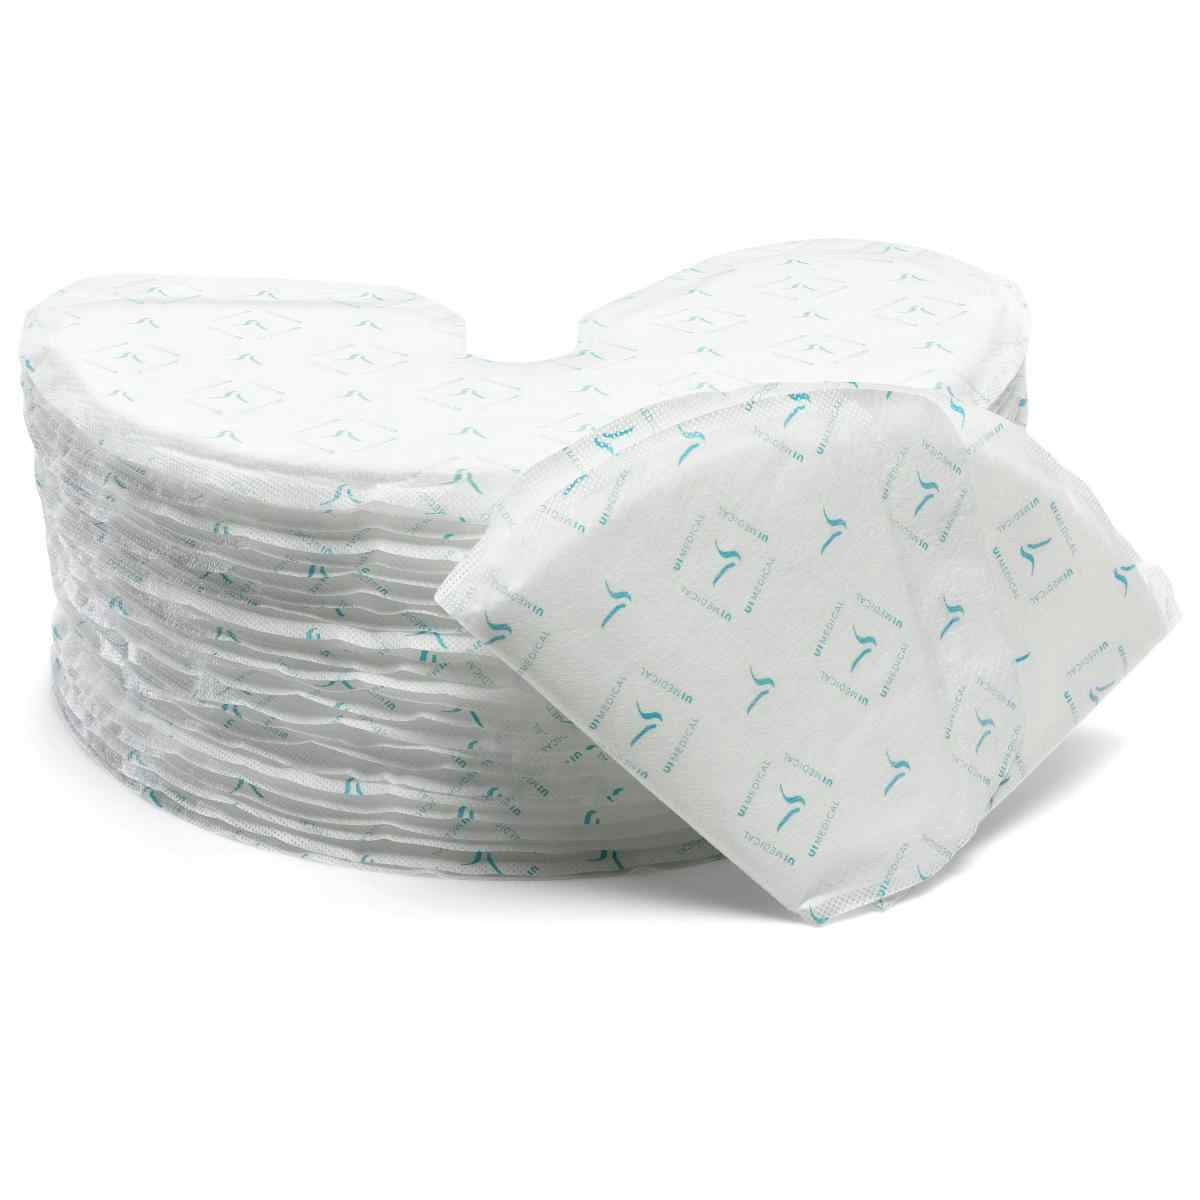 Medline QuickChange Male Incontinence Wrap, Heavy Absorbency,  UIM1025 